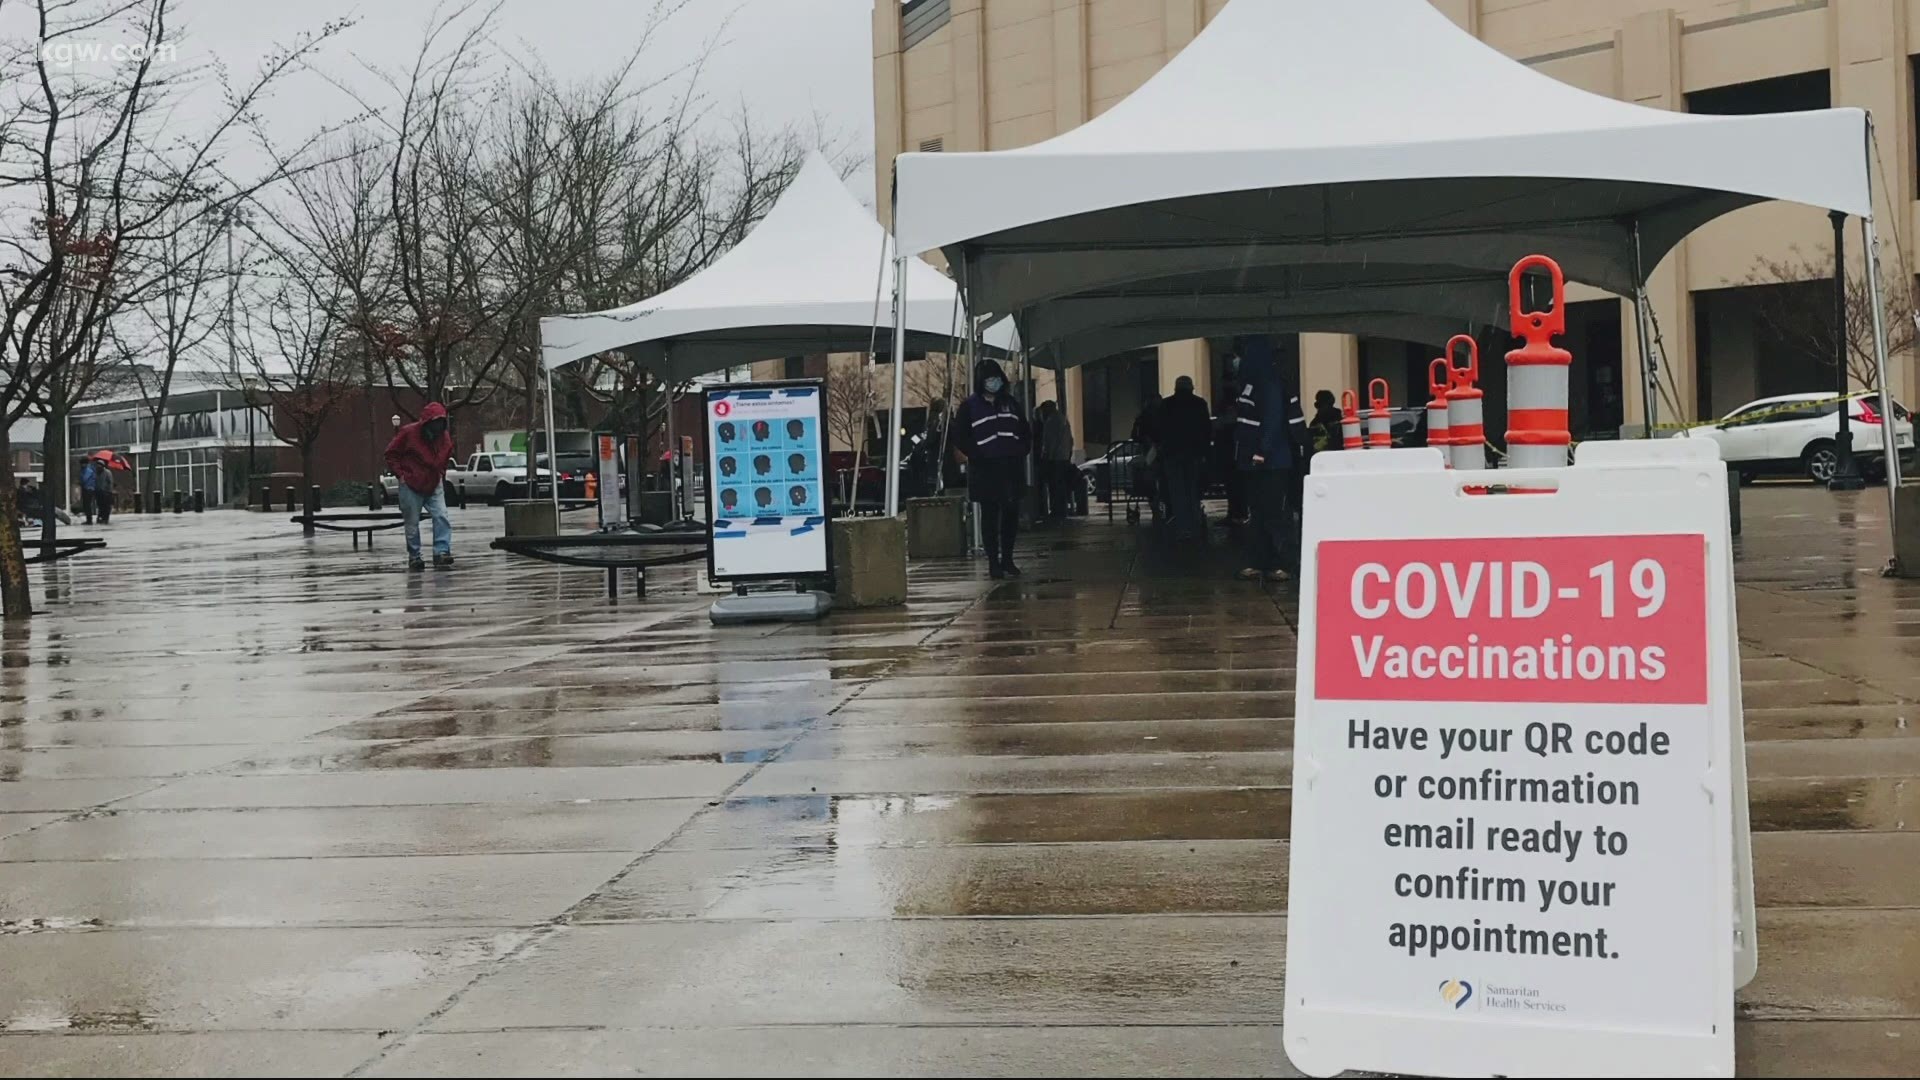 Winter storms in the south have delayed vaccine shipments and it’s impacting vaccination plans across Oregon, except in the Portland area. Pat Dooris reports.